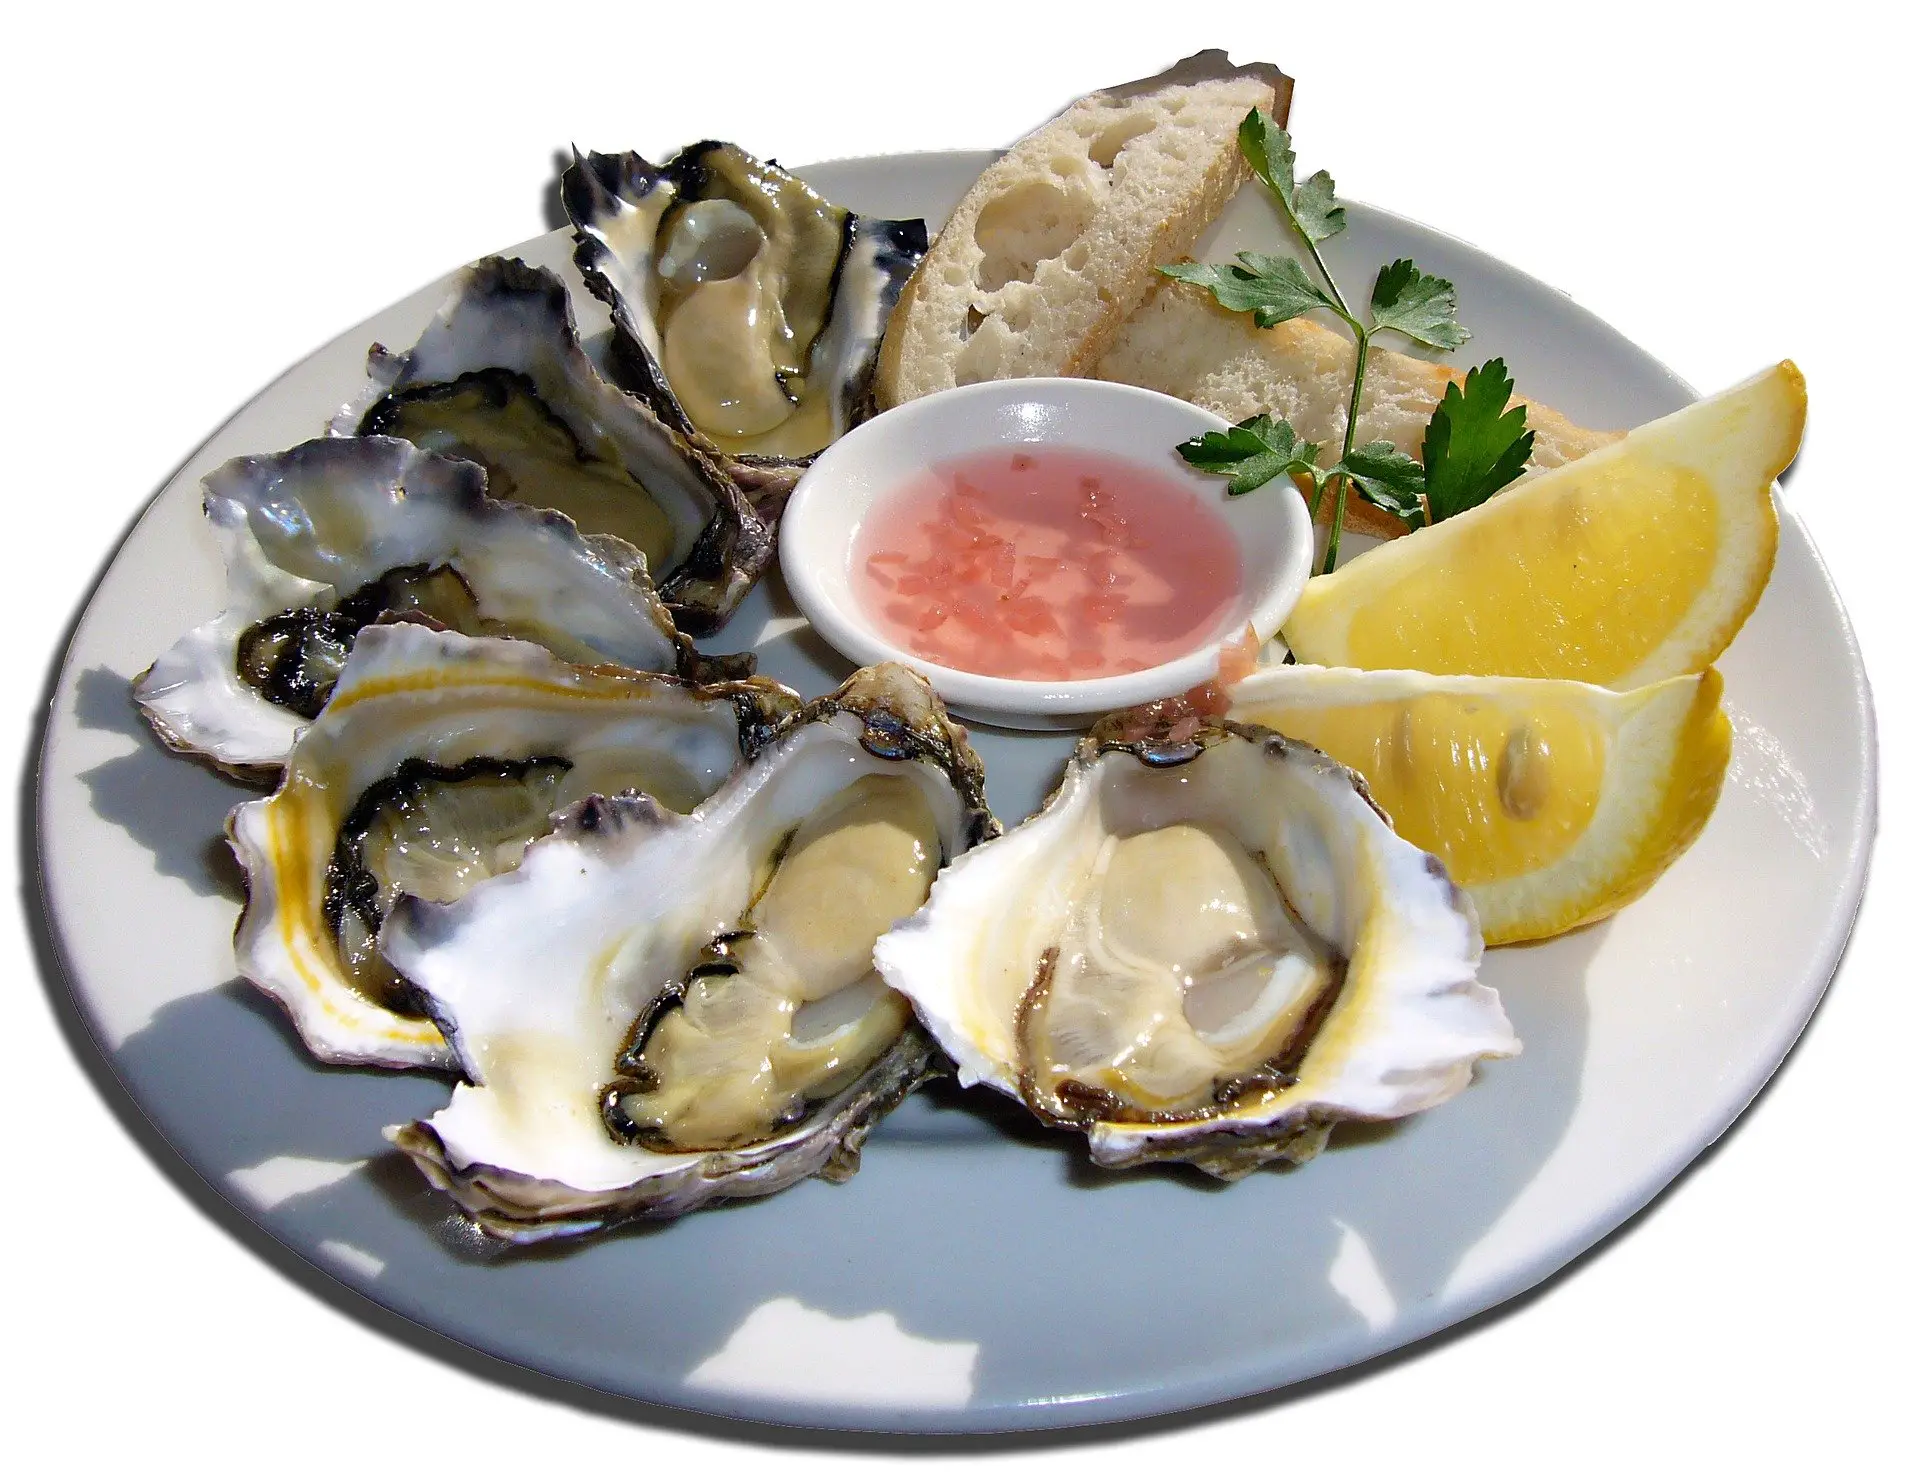 A platter of raw oysters to be served